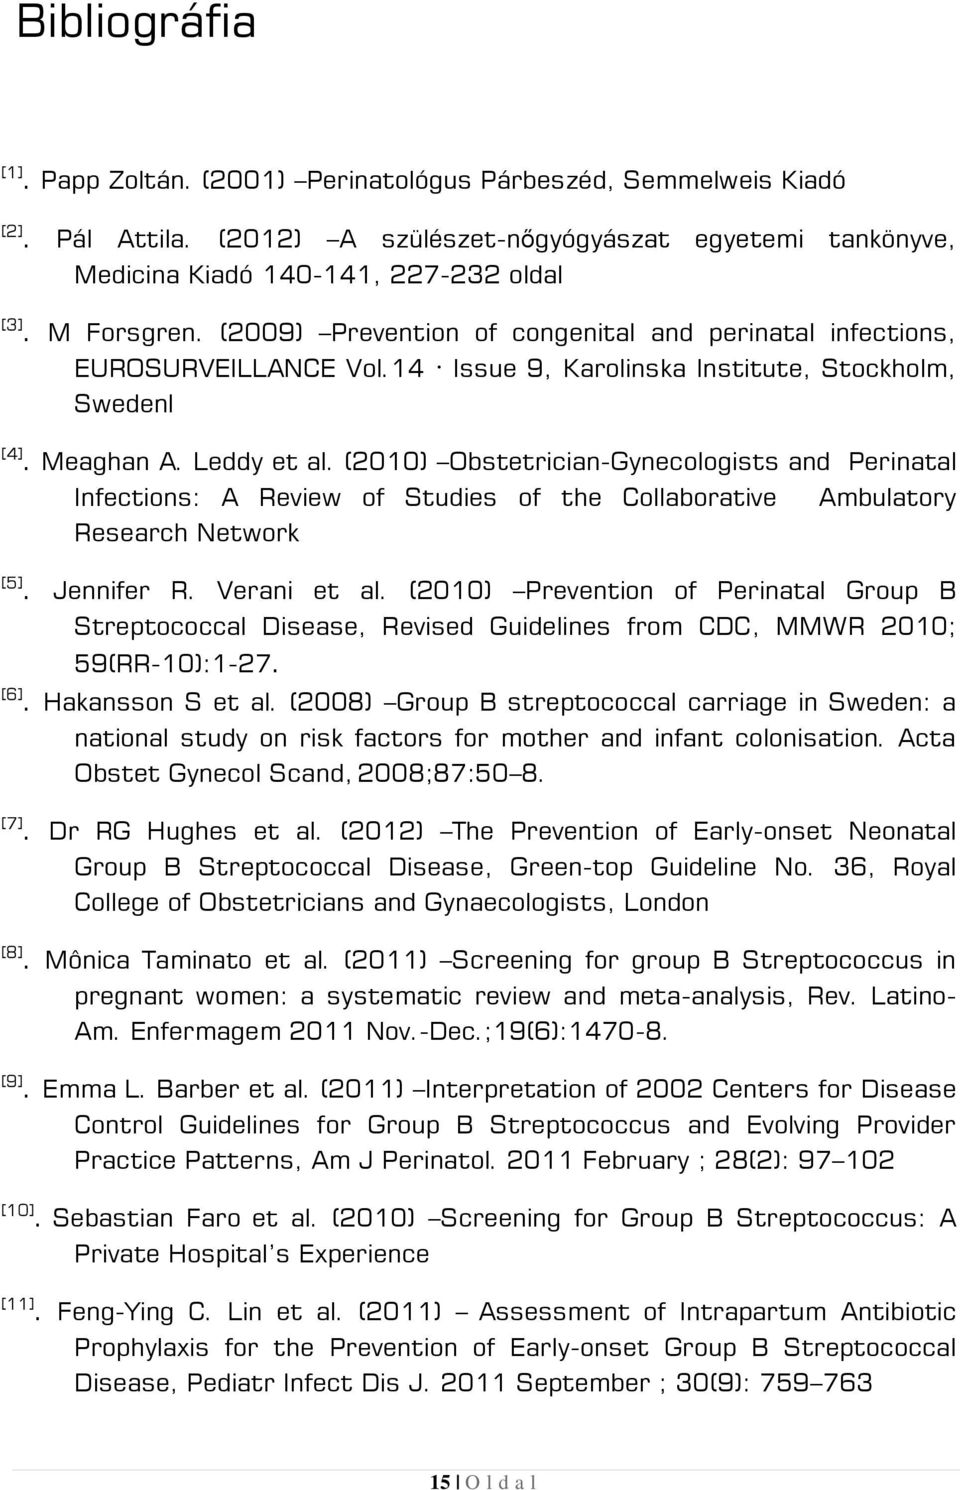 (2010) Obstetrician-Gynecologists and Perinatal Infections: A Review of Studies of the Collaborative Research Network Ambulatory [5]. Jennifer R. Verani et al.